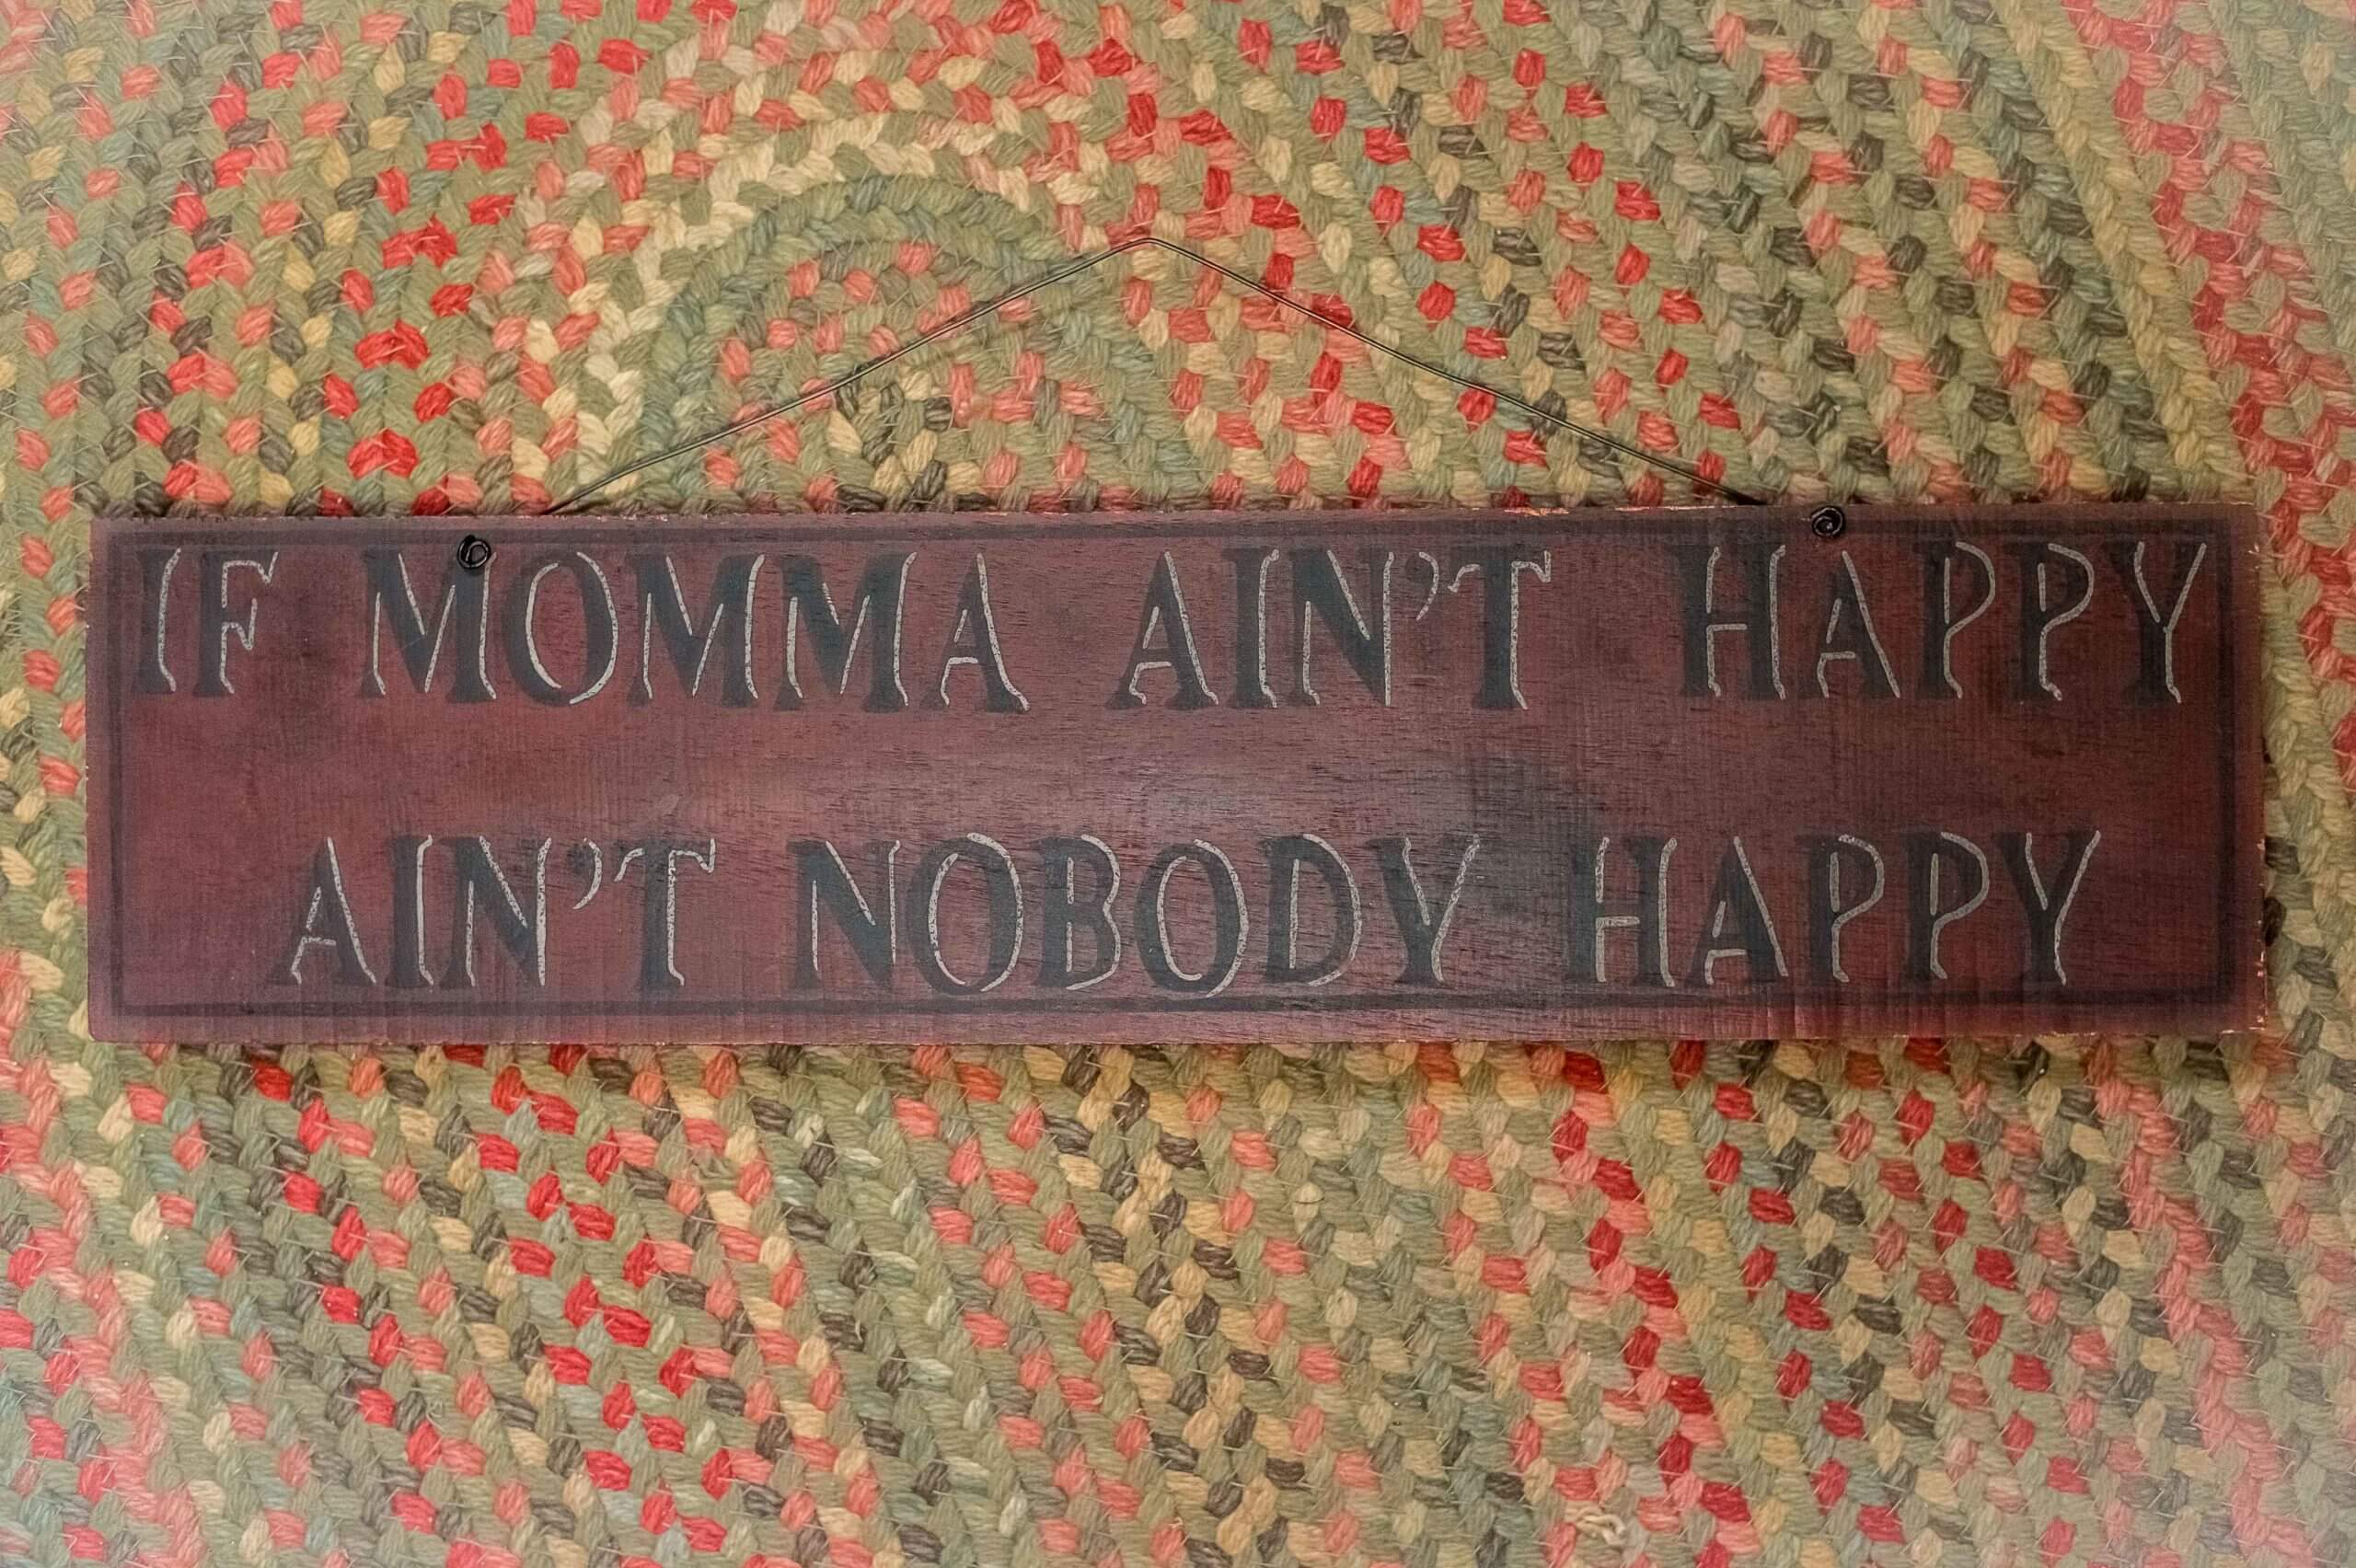 Color image of a wooden sign that reads "If Mamma Ain't Happy, Ain't Nobody Happy" on a laying on a braided rug.